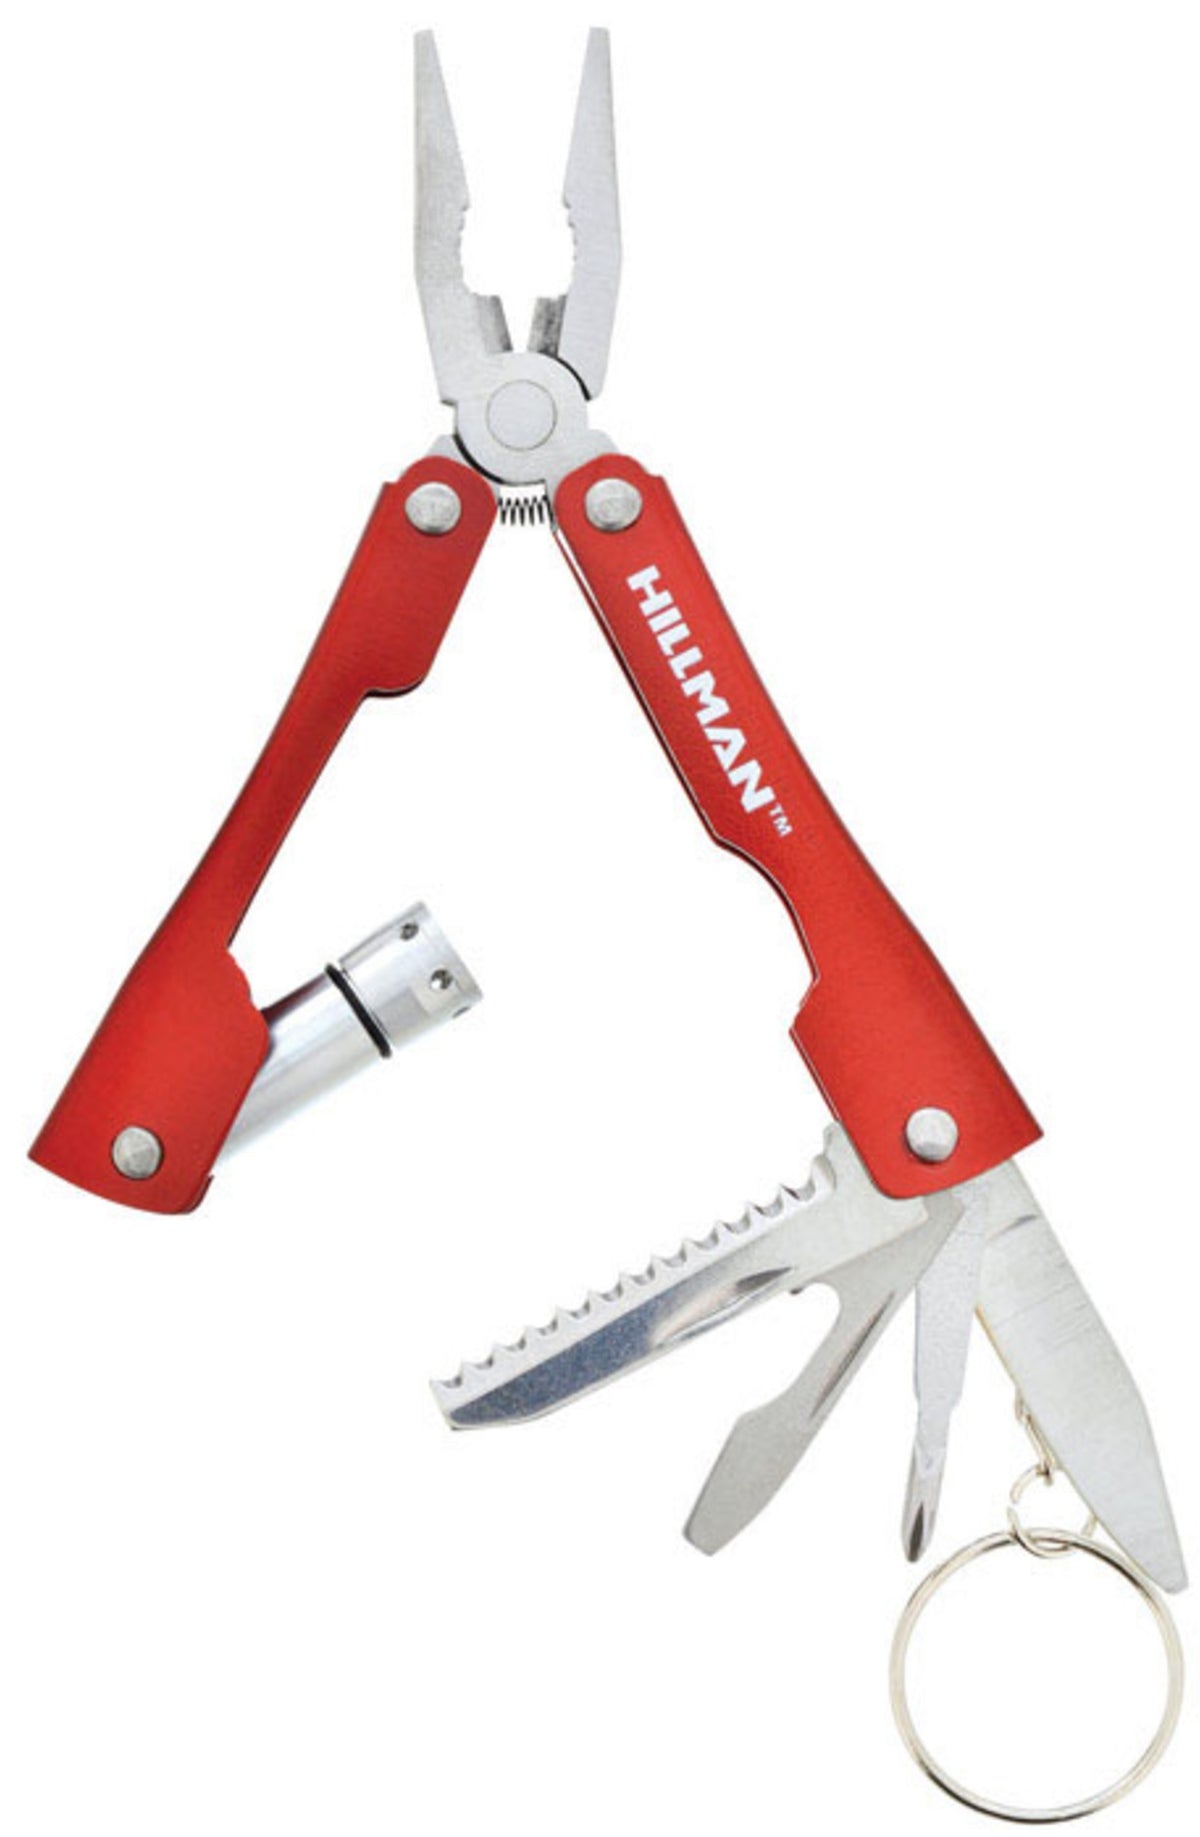 Hillman Fasteners 713168 Multi-Tool High End Accessories Key Ring, Metal, Red